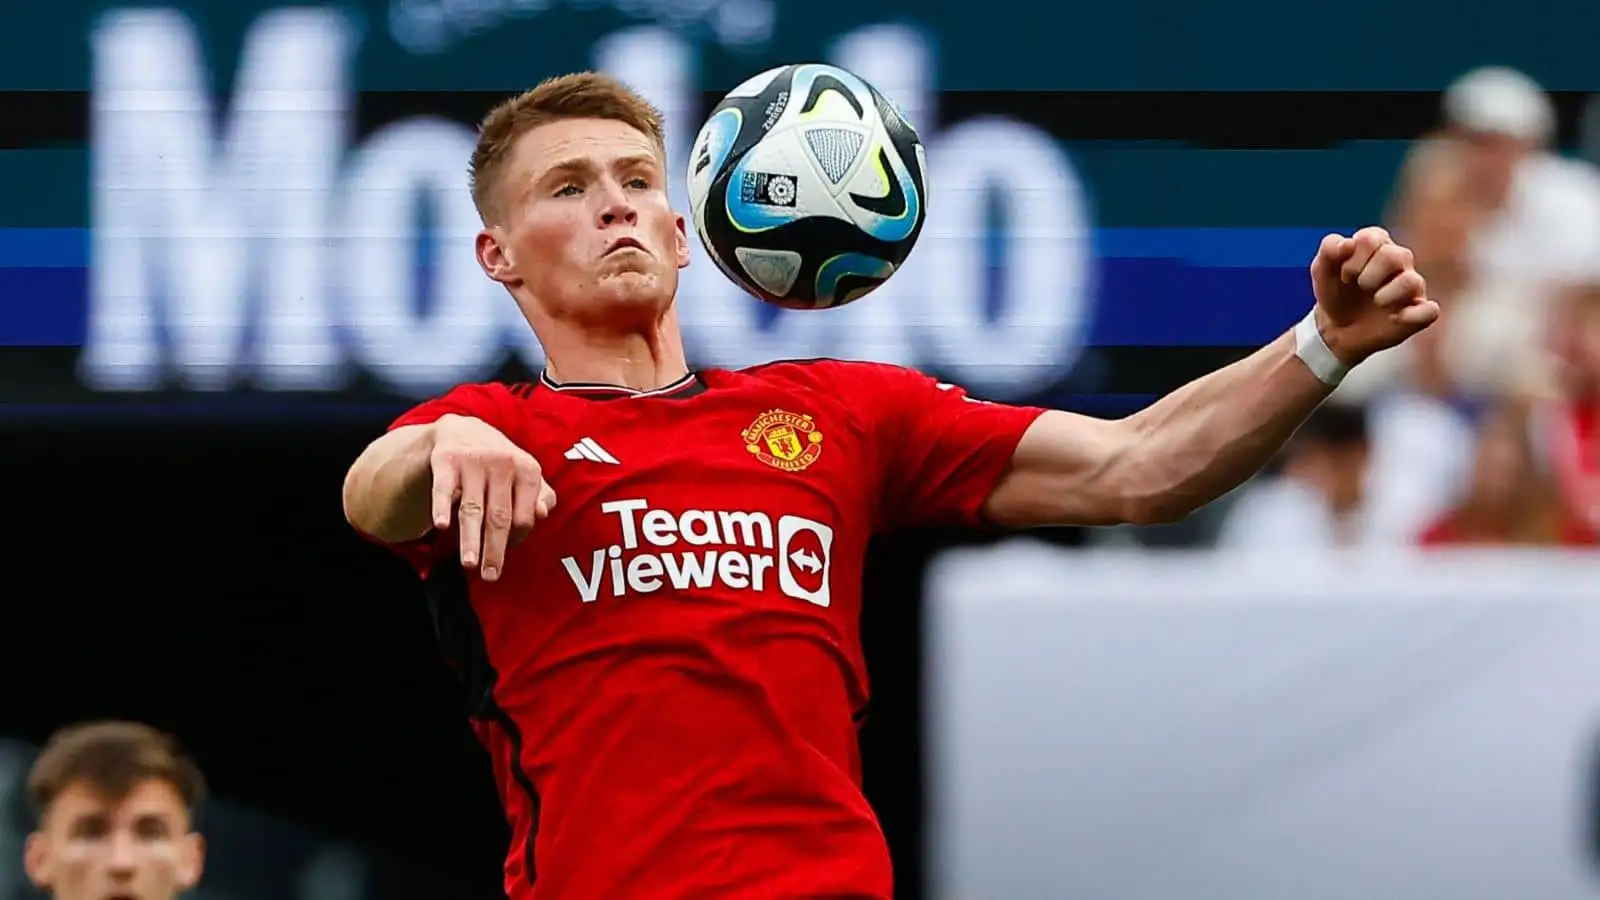 Scott McTominay no 39 of Manchester United during the Champions Tour soccer game against Arsenal on July 22, 2023 at MetLife Stadium in East Rutherford, New Jersey